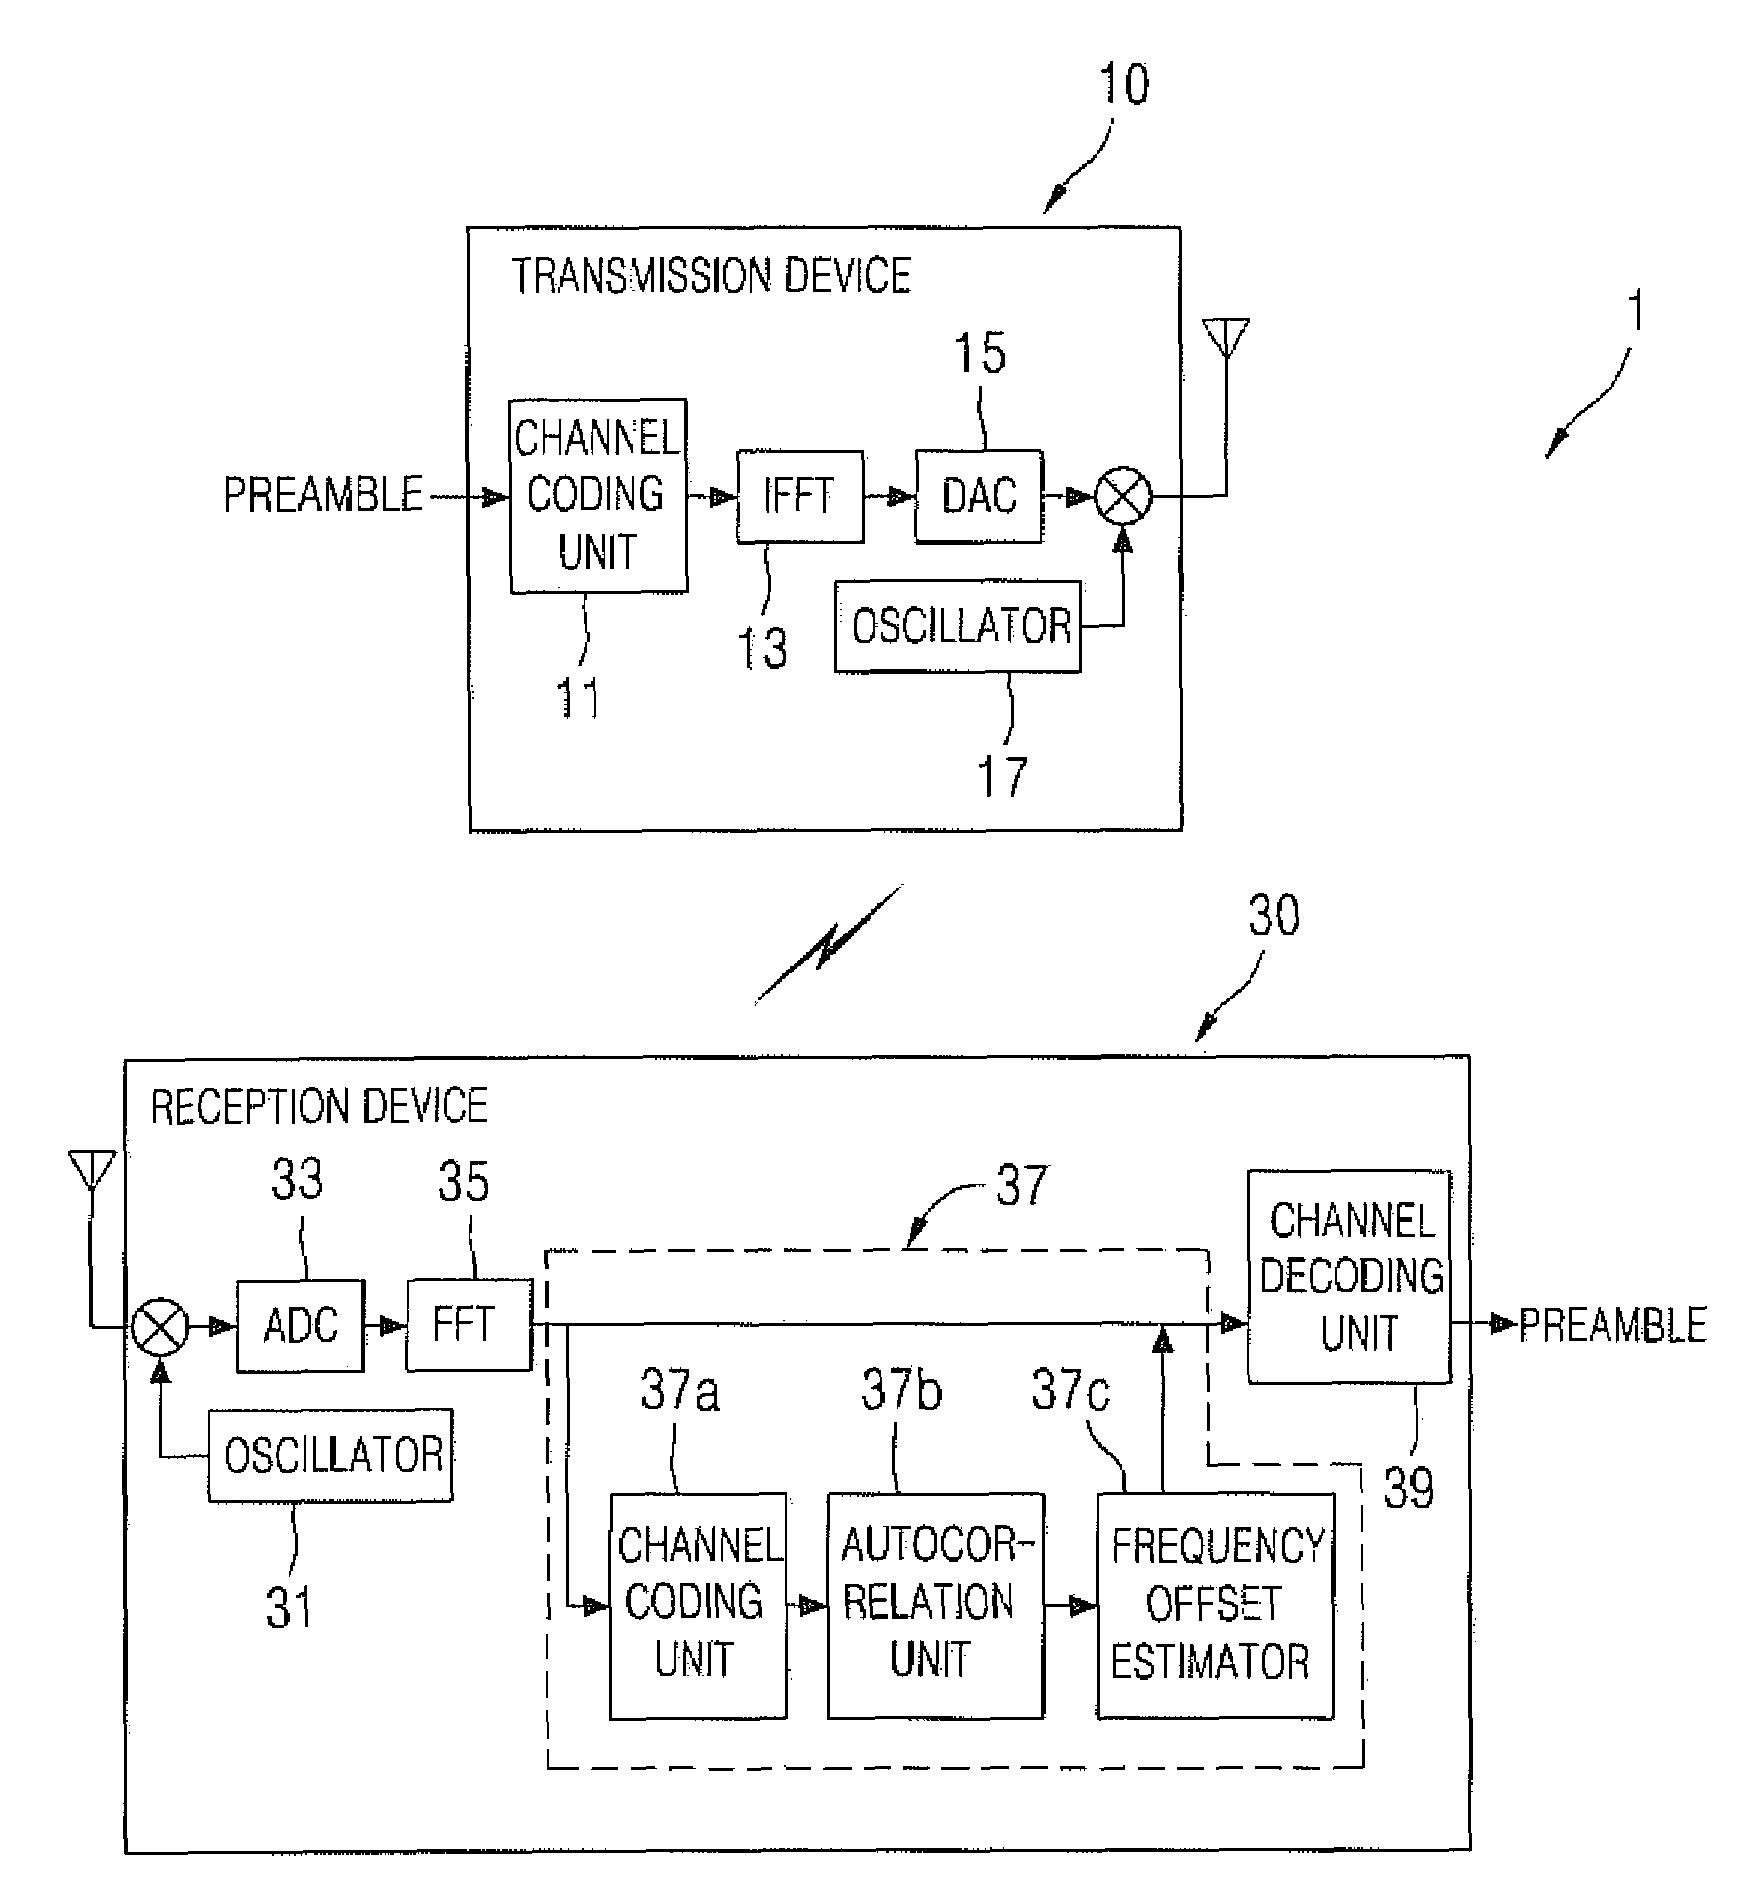 Joint estimation apparatus of channel and frequency offset based on multiband-orthogonal frequency division multiplexing and thereof